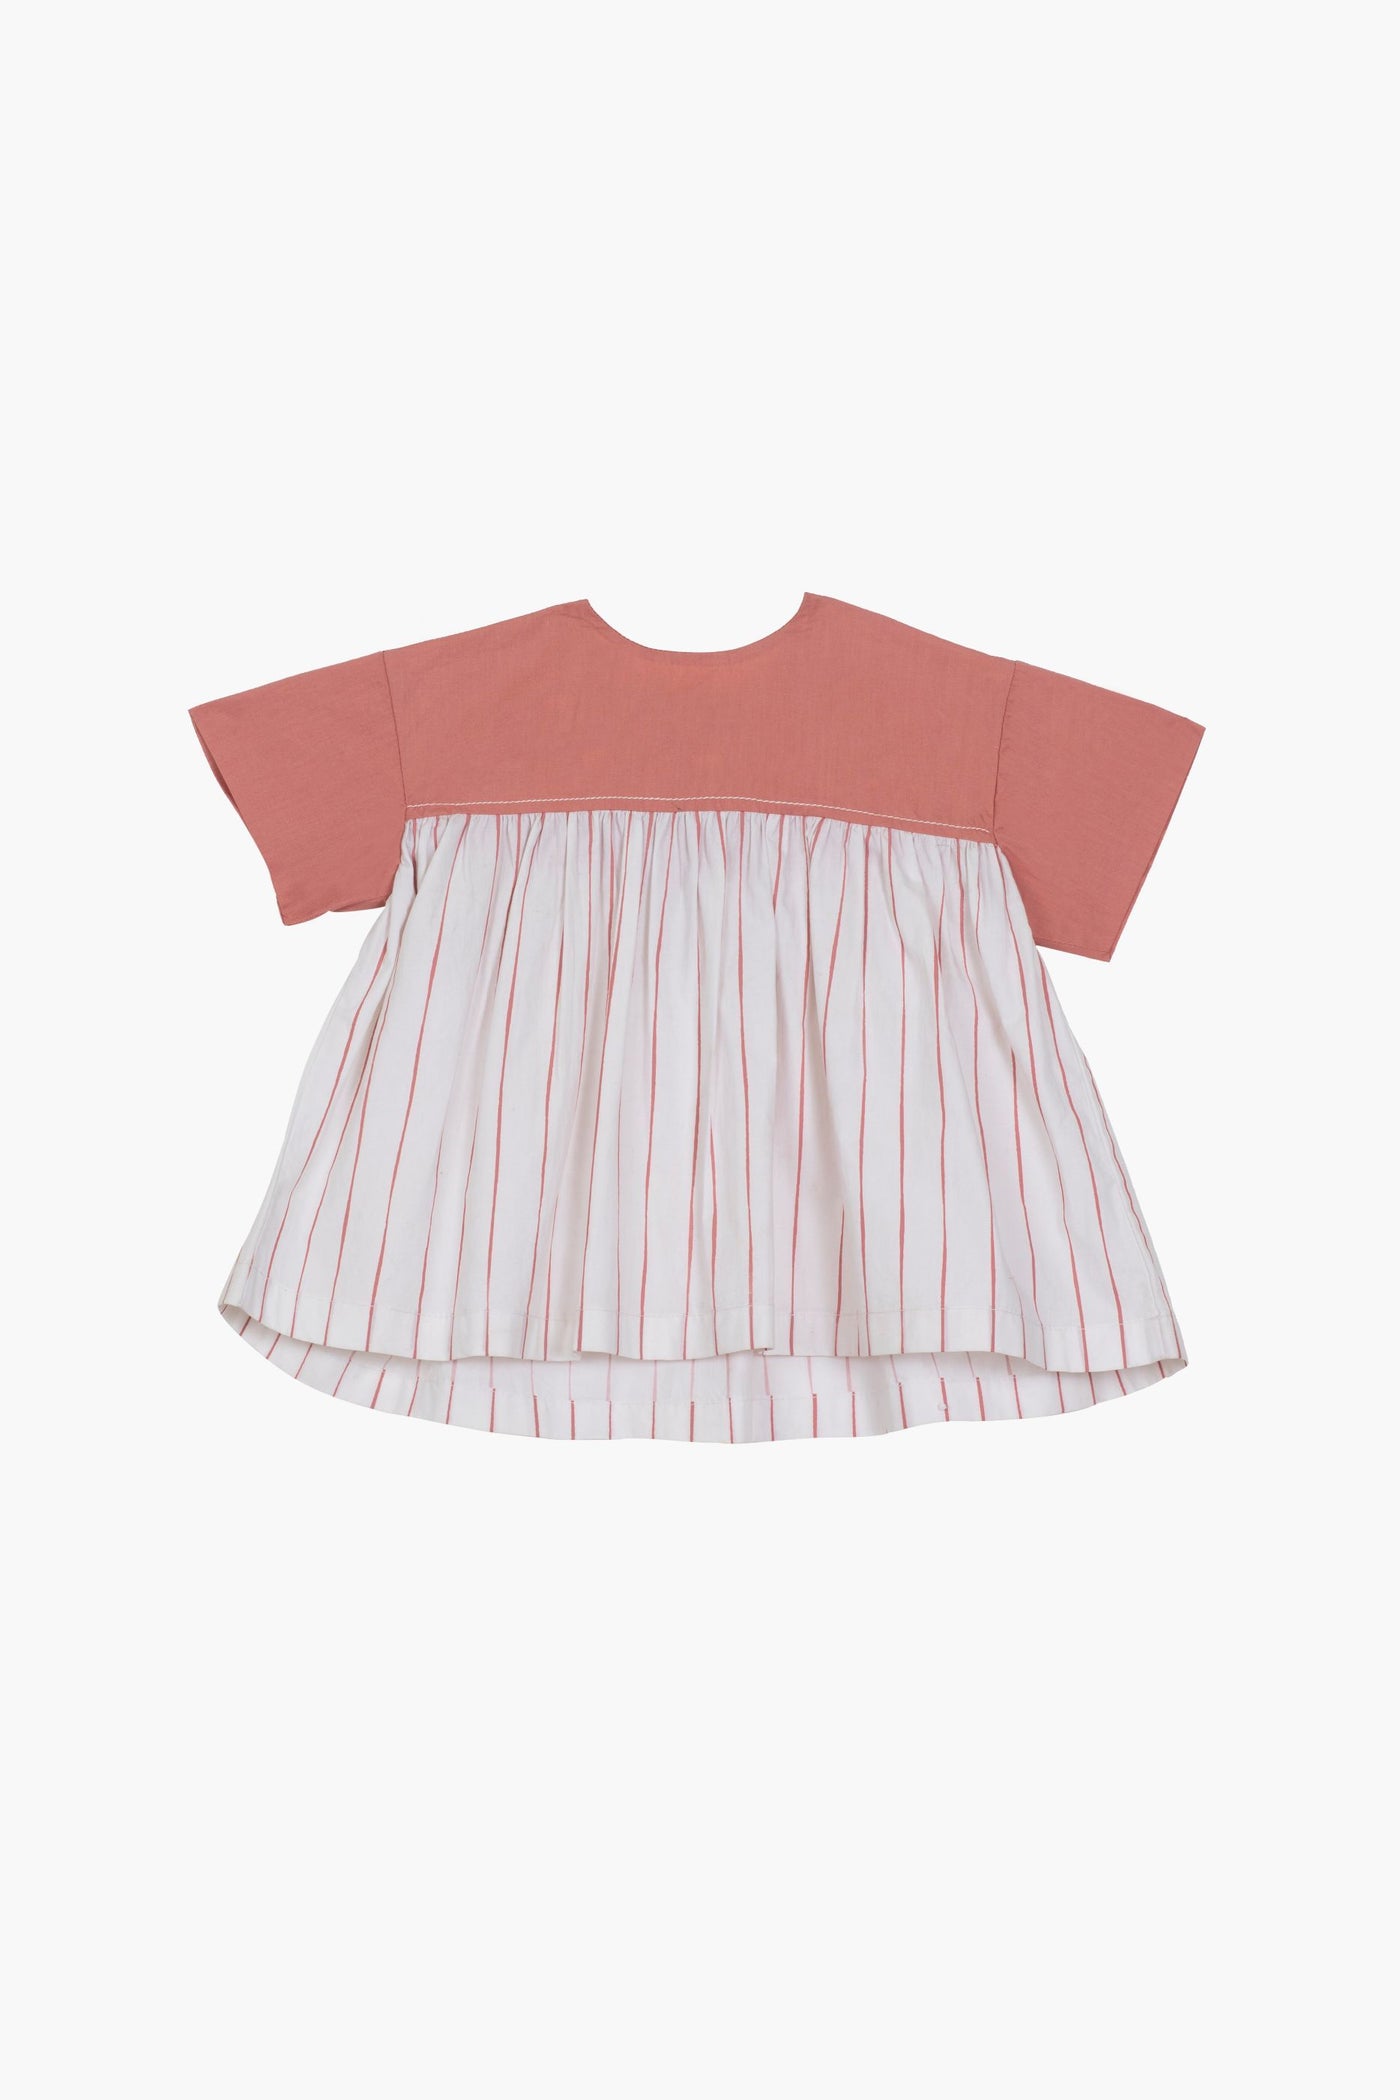 Gather Top Co-ord- Dusty Rose Kids THREE Kids 